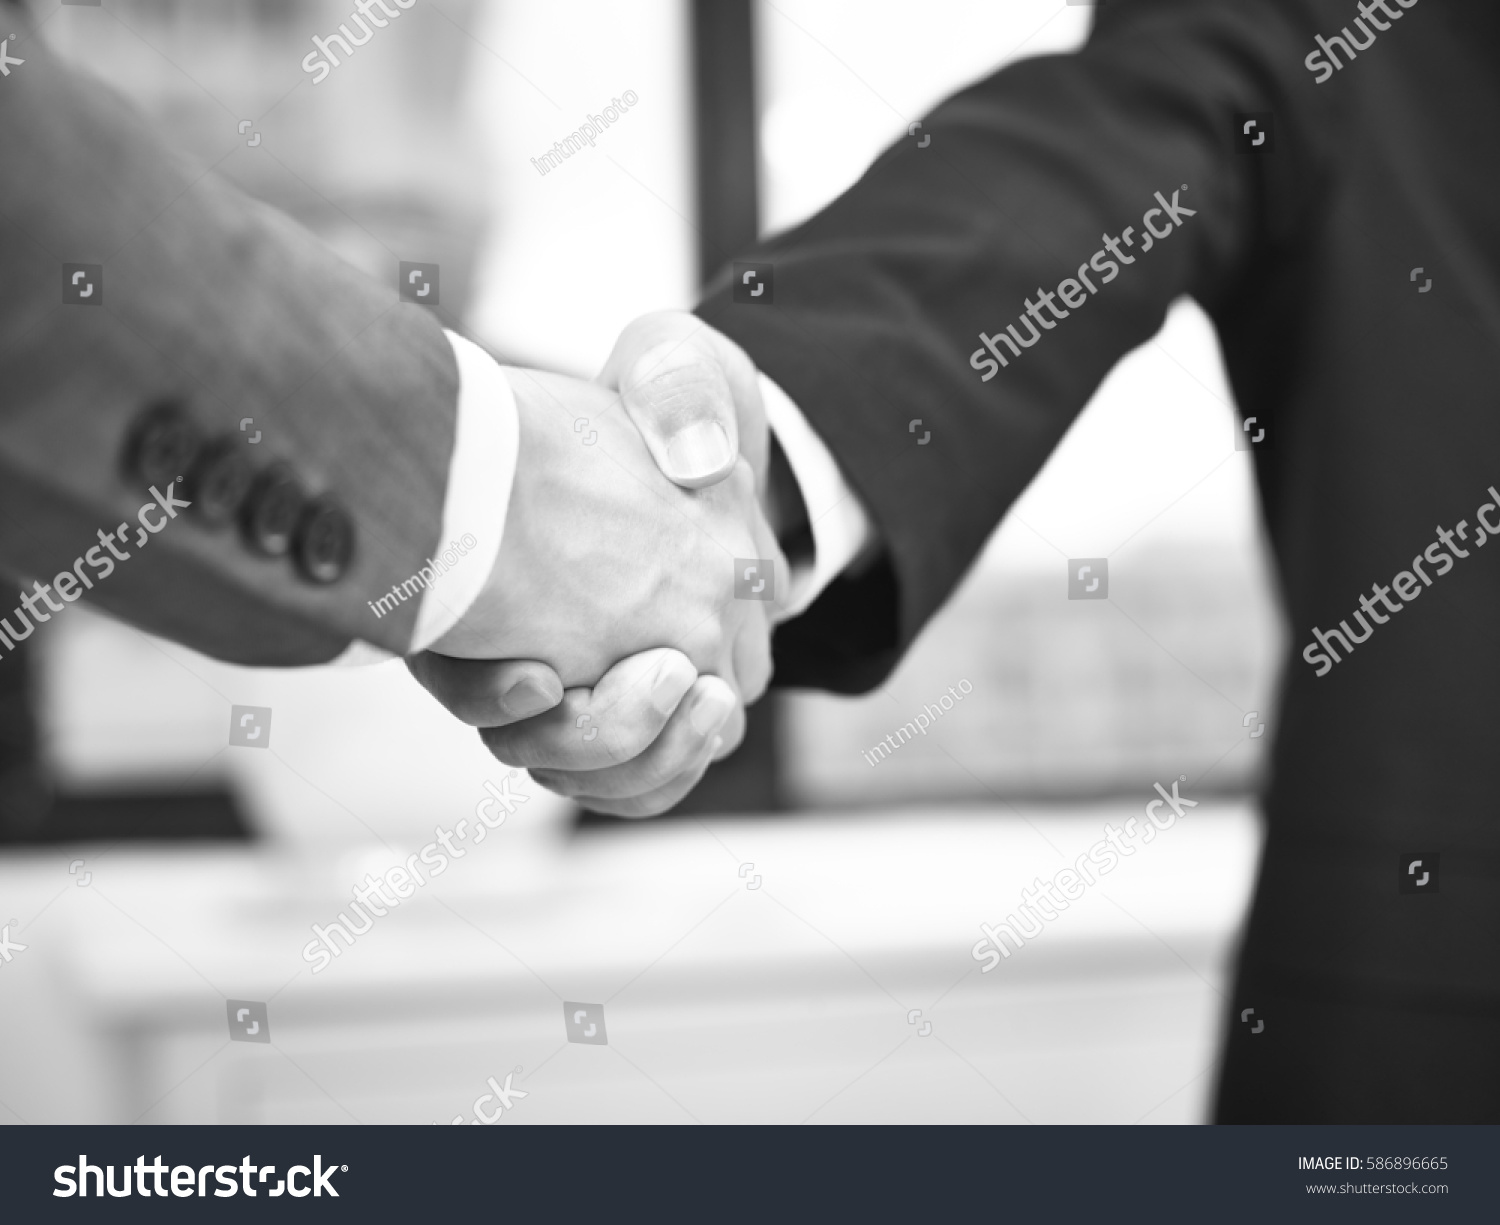 two corporate businessmen shaking hands in office, black and white. #586896665